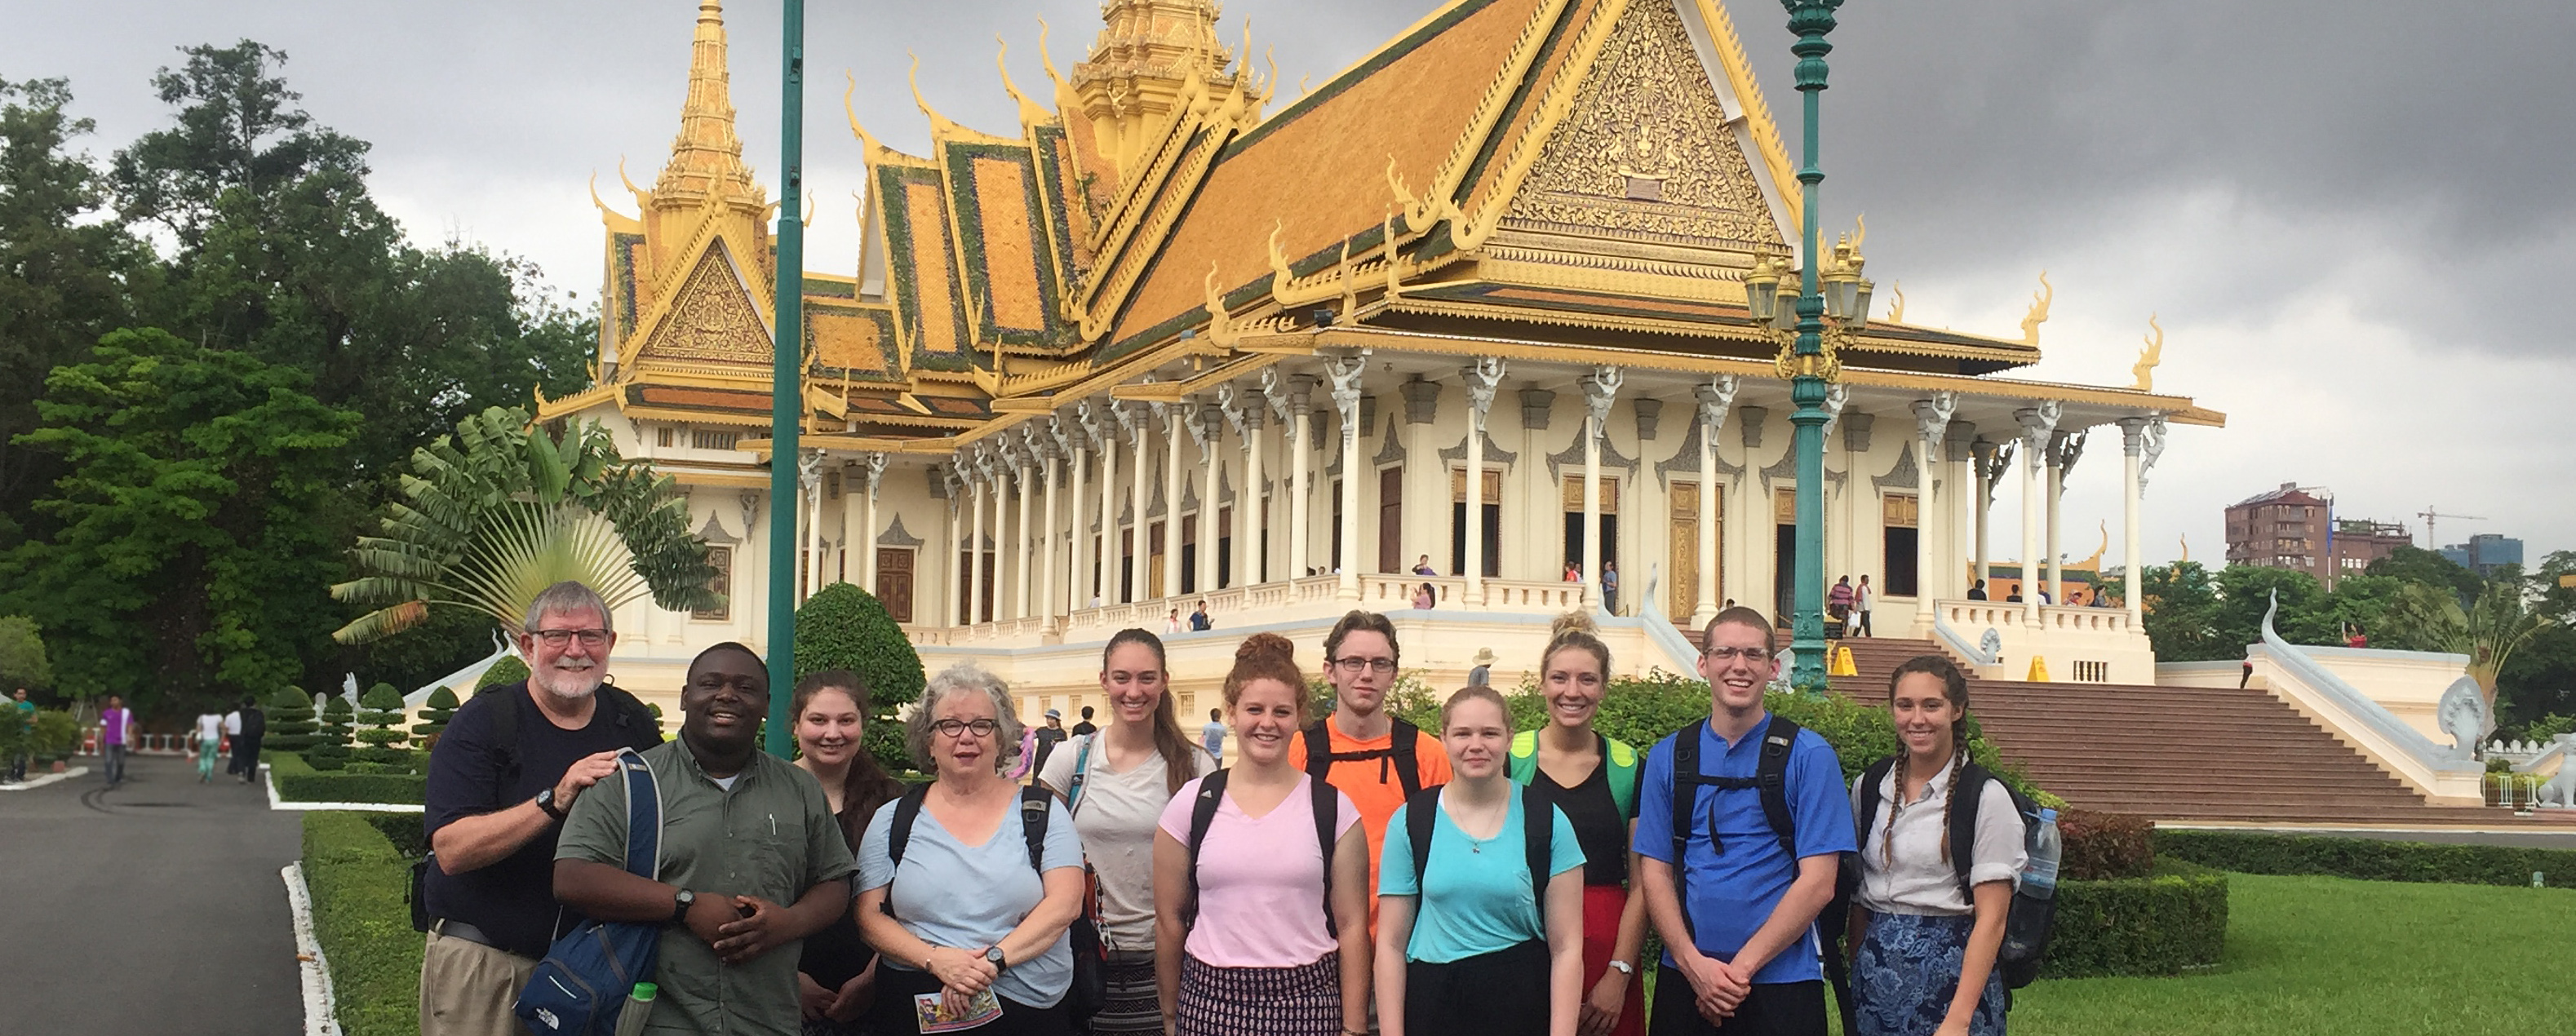 11 individuals from Defiance College wearing all different and brightly colored shirts with backpacks. They are gathered together to smile at the camera, standing in front of a large pale yellow building with a tall golden roof. The building is the Silver Pagoda in Cambodia.